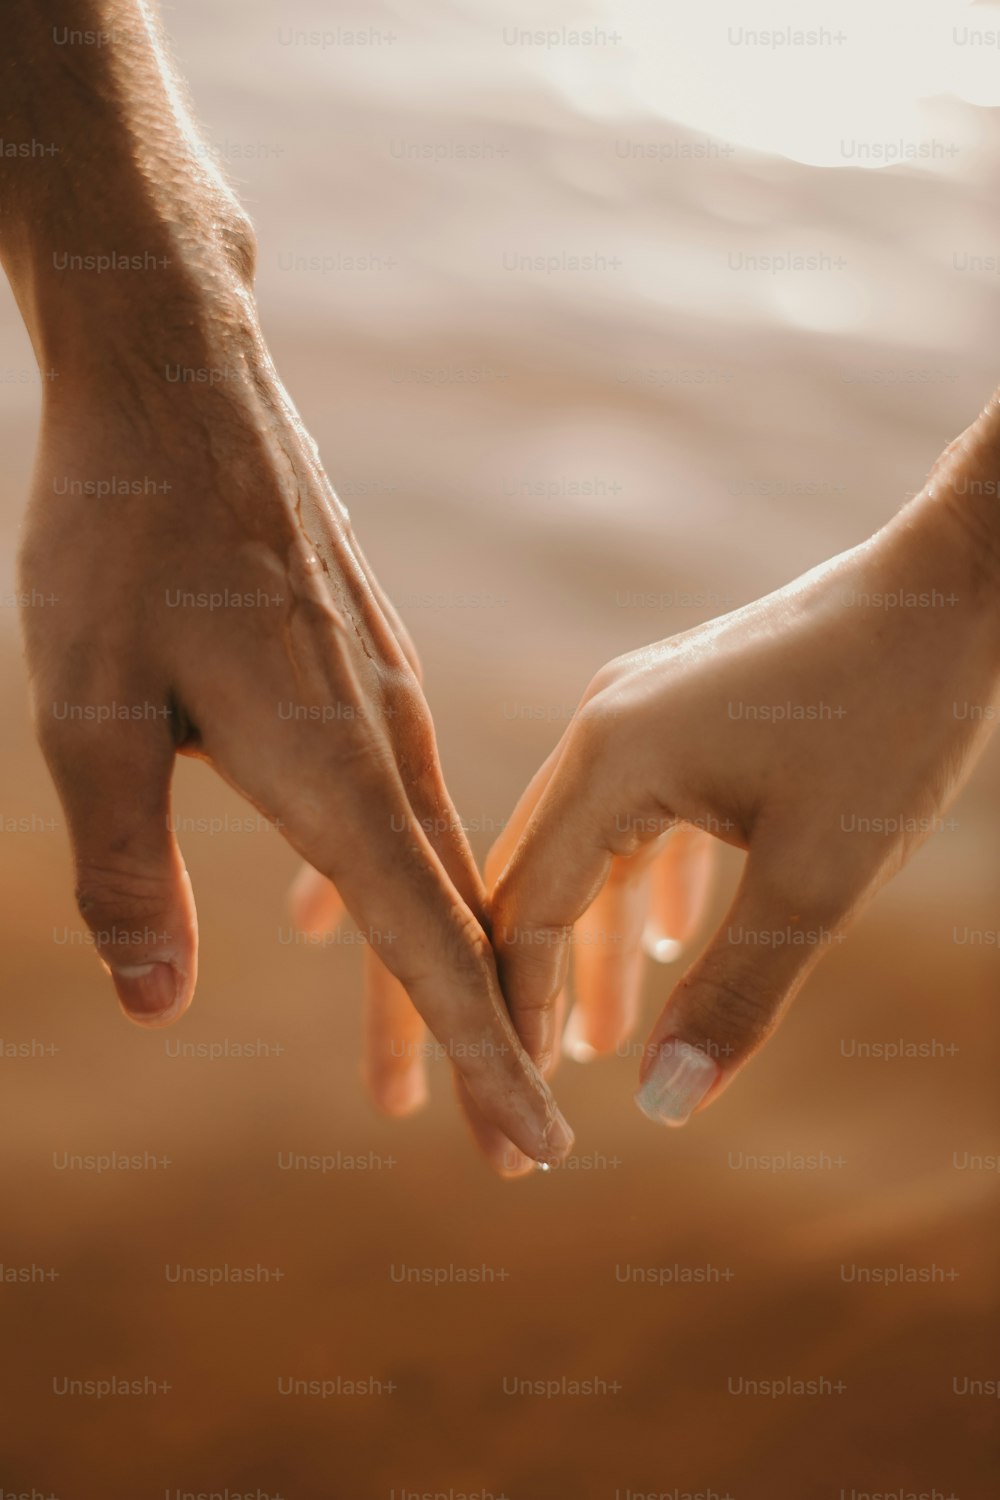 a couple of people holding hands over a body of water